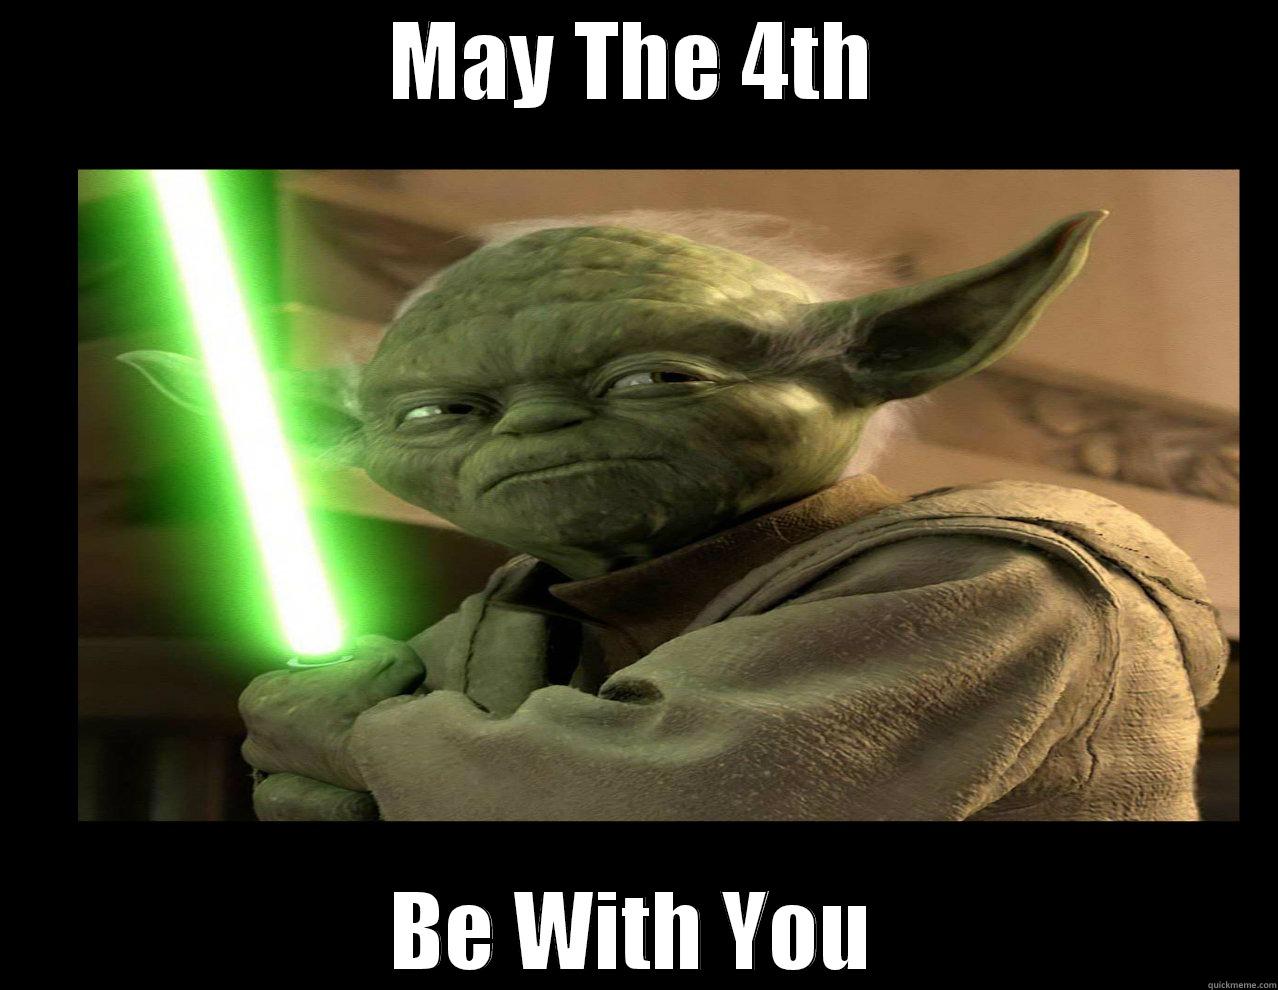 MAY THE 4TH BE WITH YOU Misc